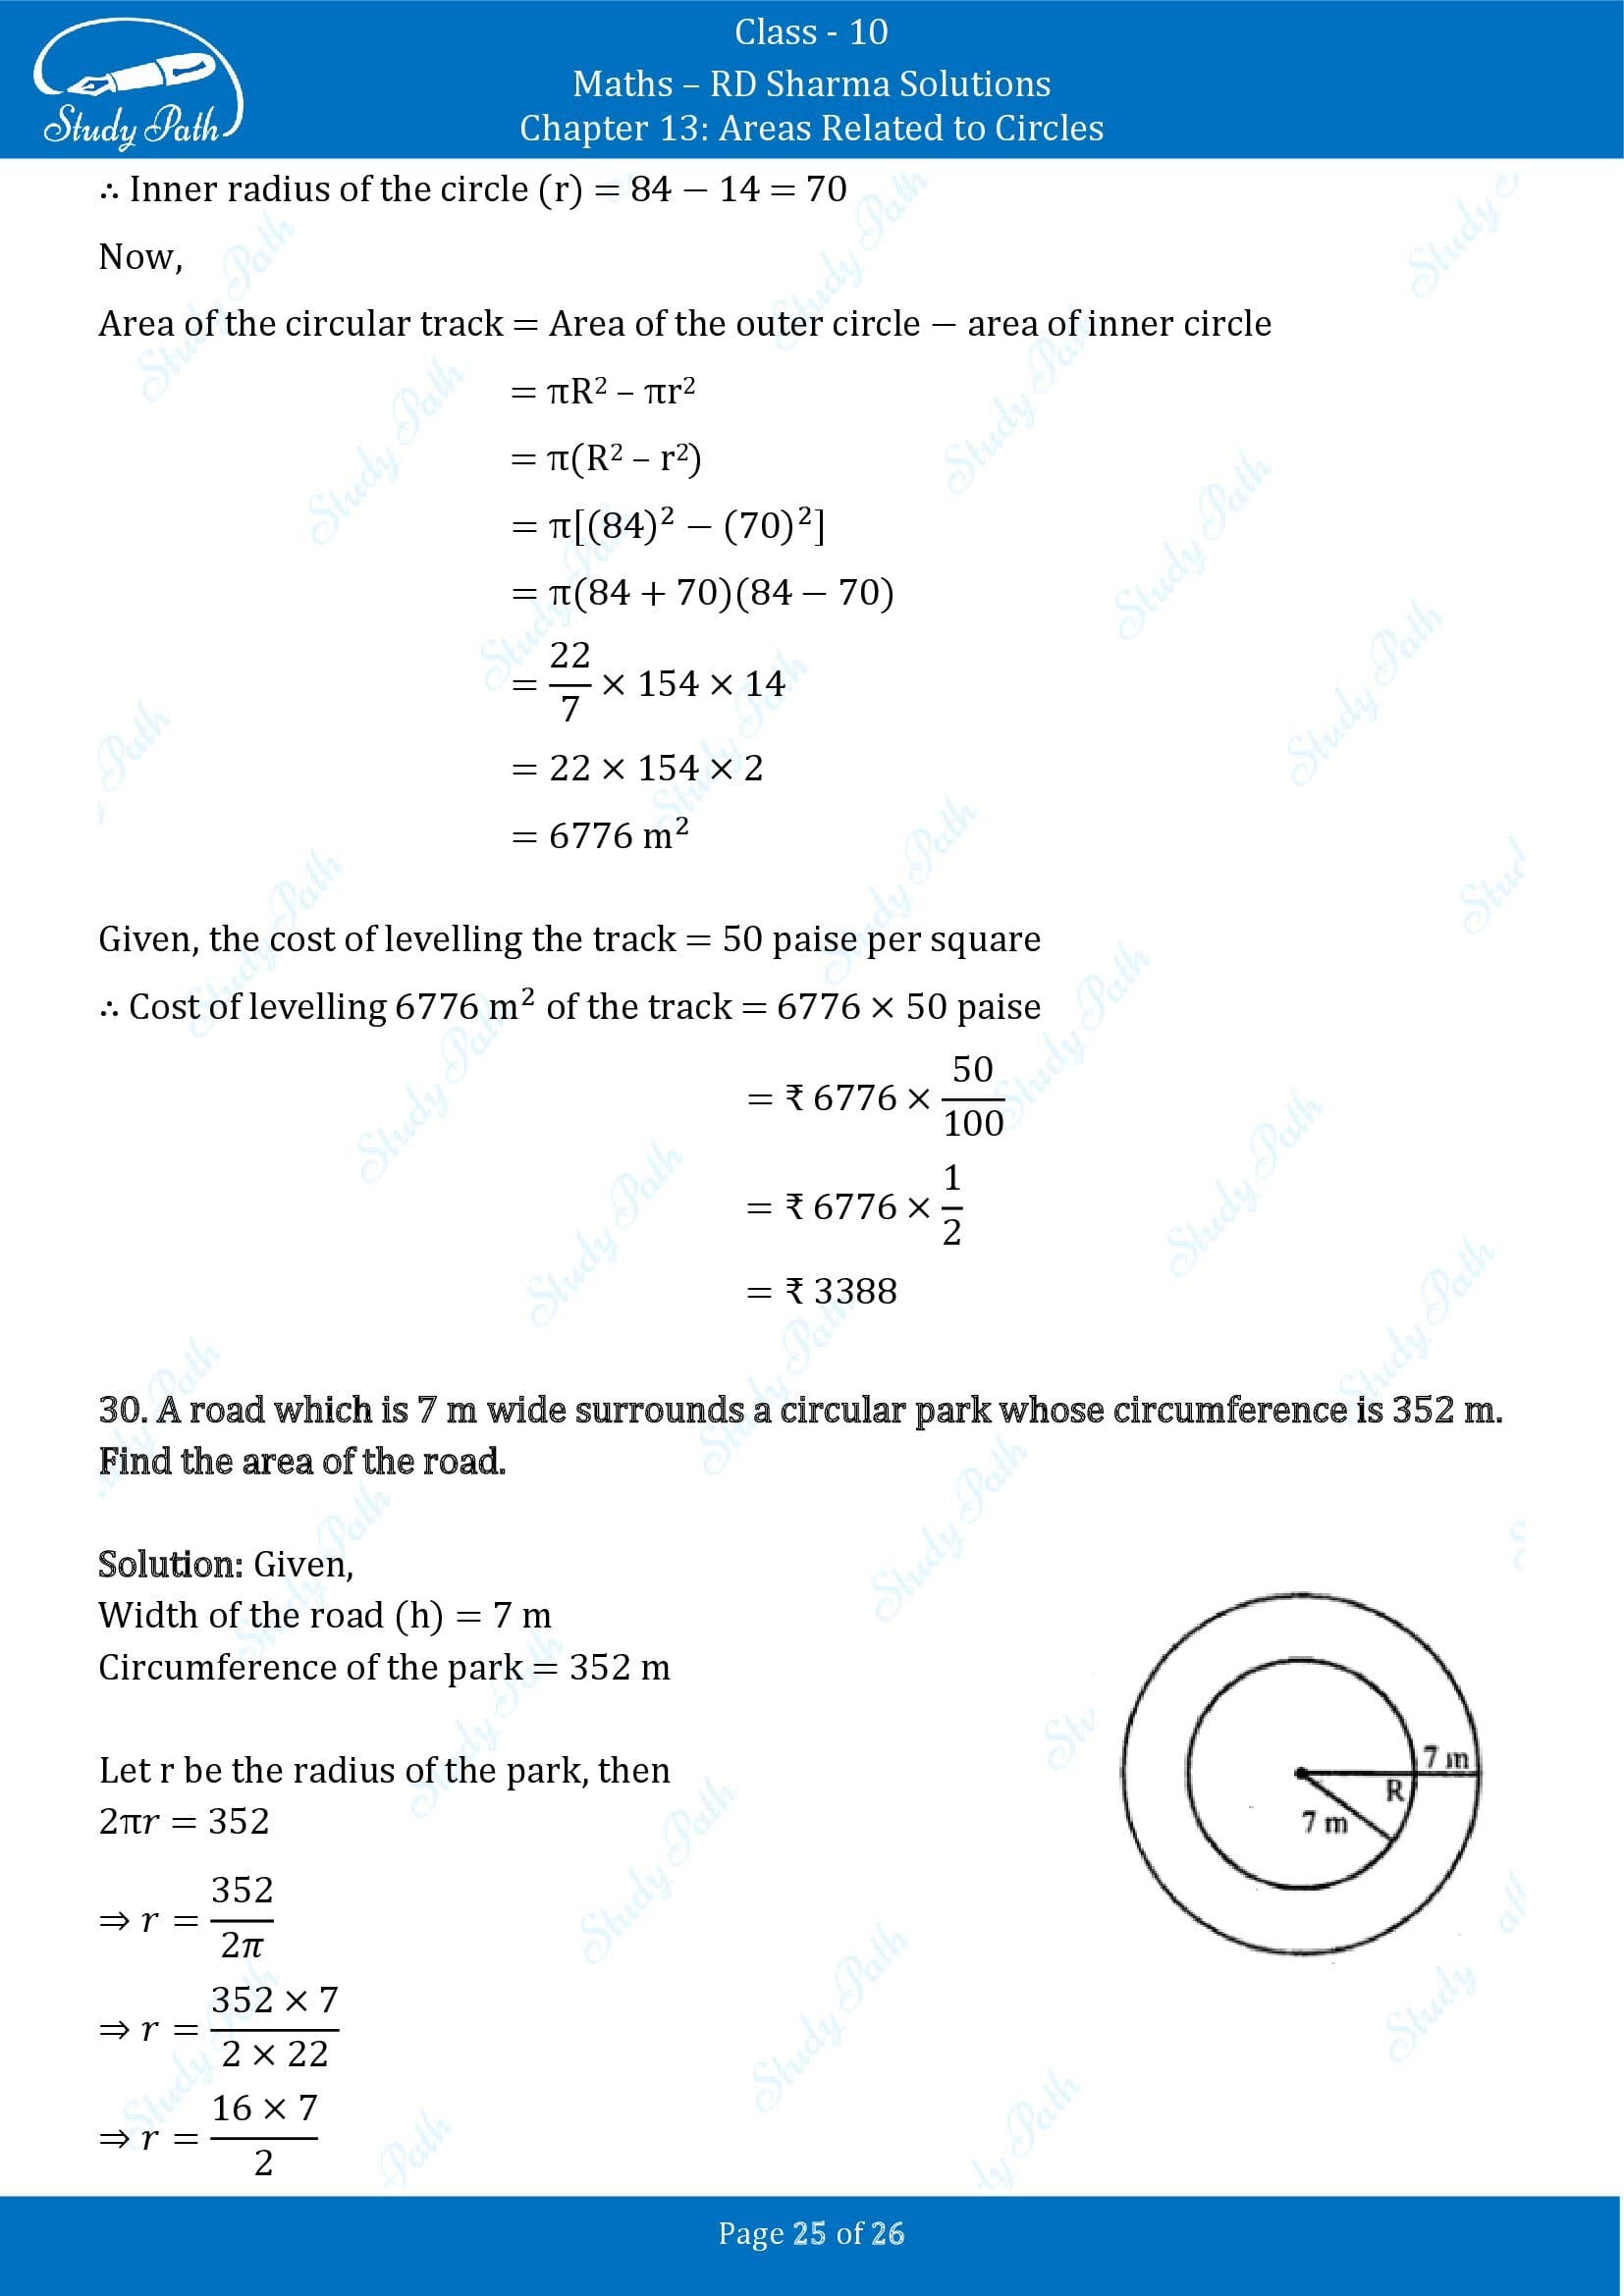 RD Sharma Solutions Class 10 Chapter 13 Areas Related to Circles Exercise 13.1 00025